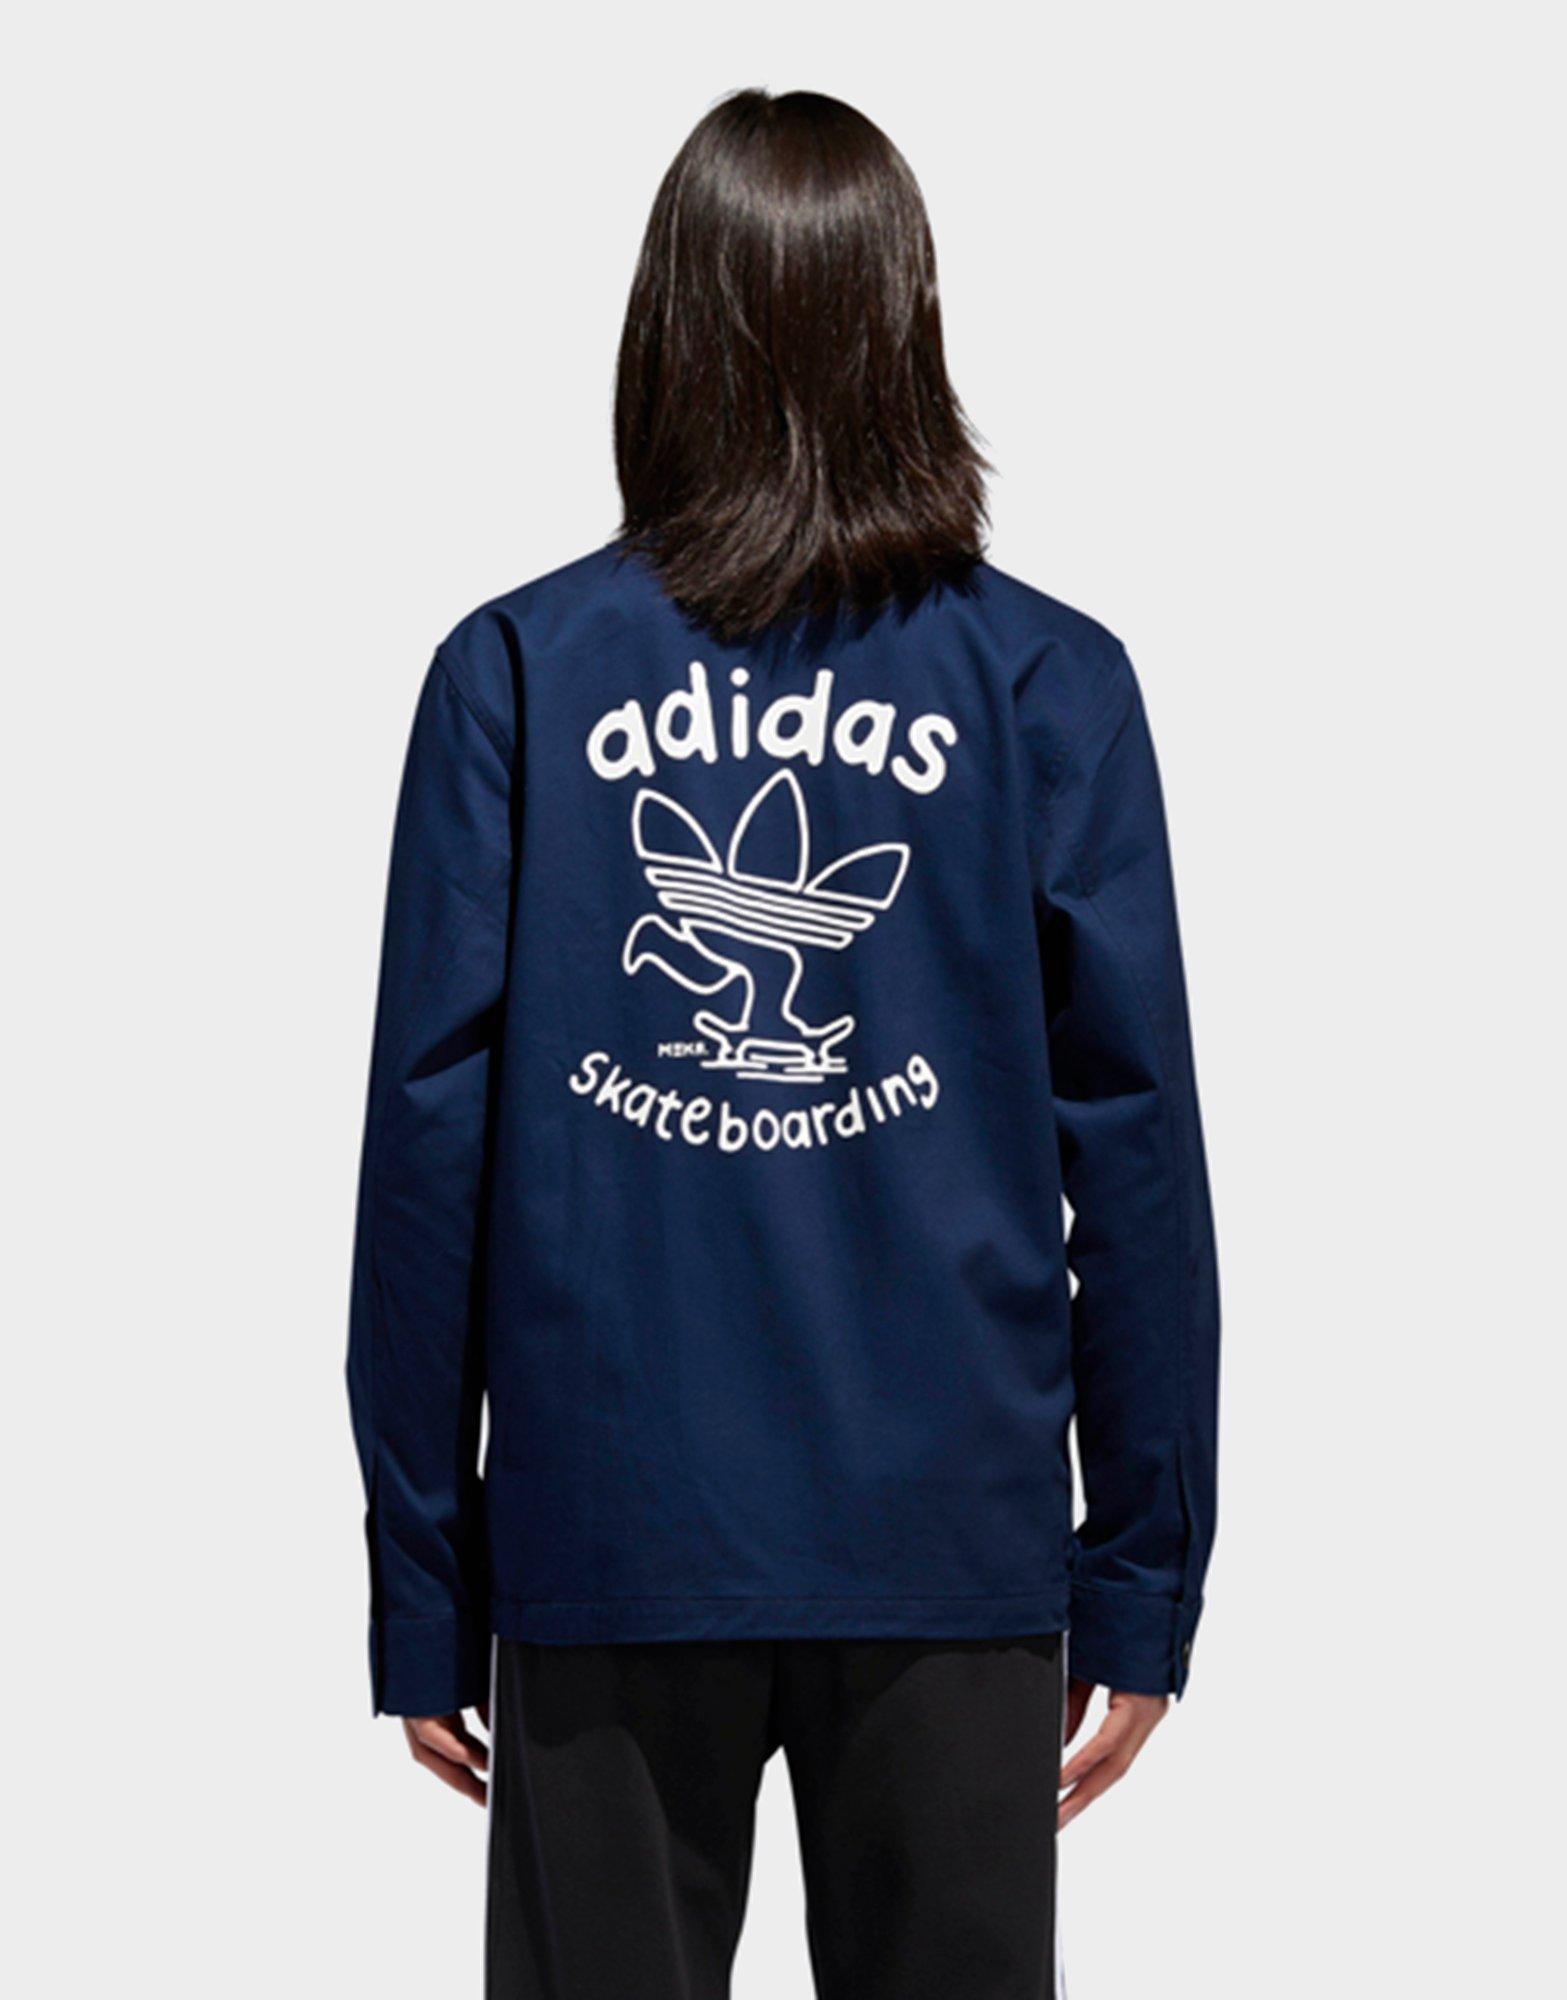 adidas Cotton Ankeny Jacket in Blue for 